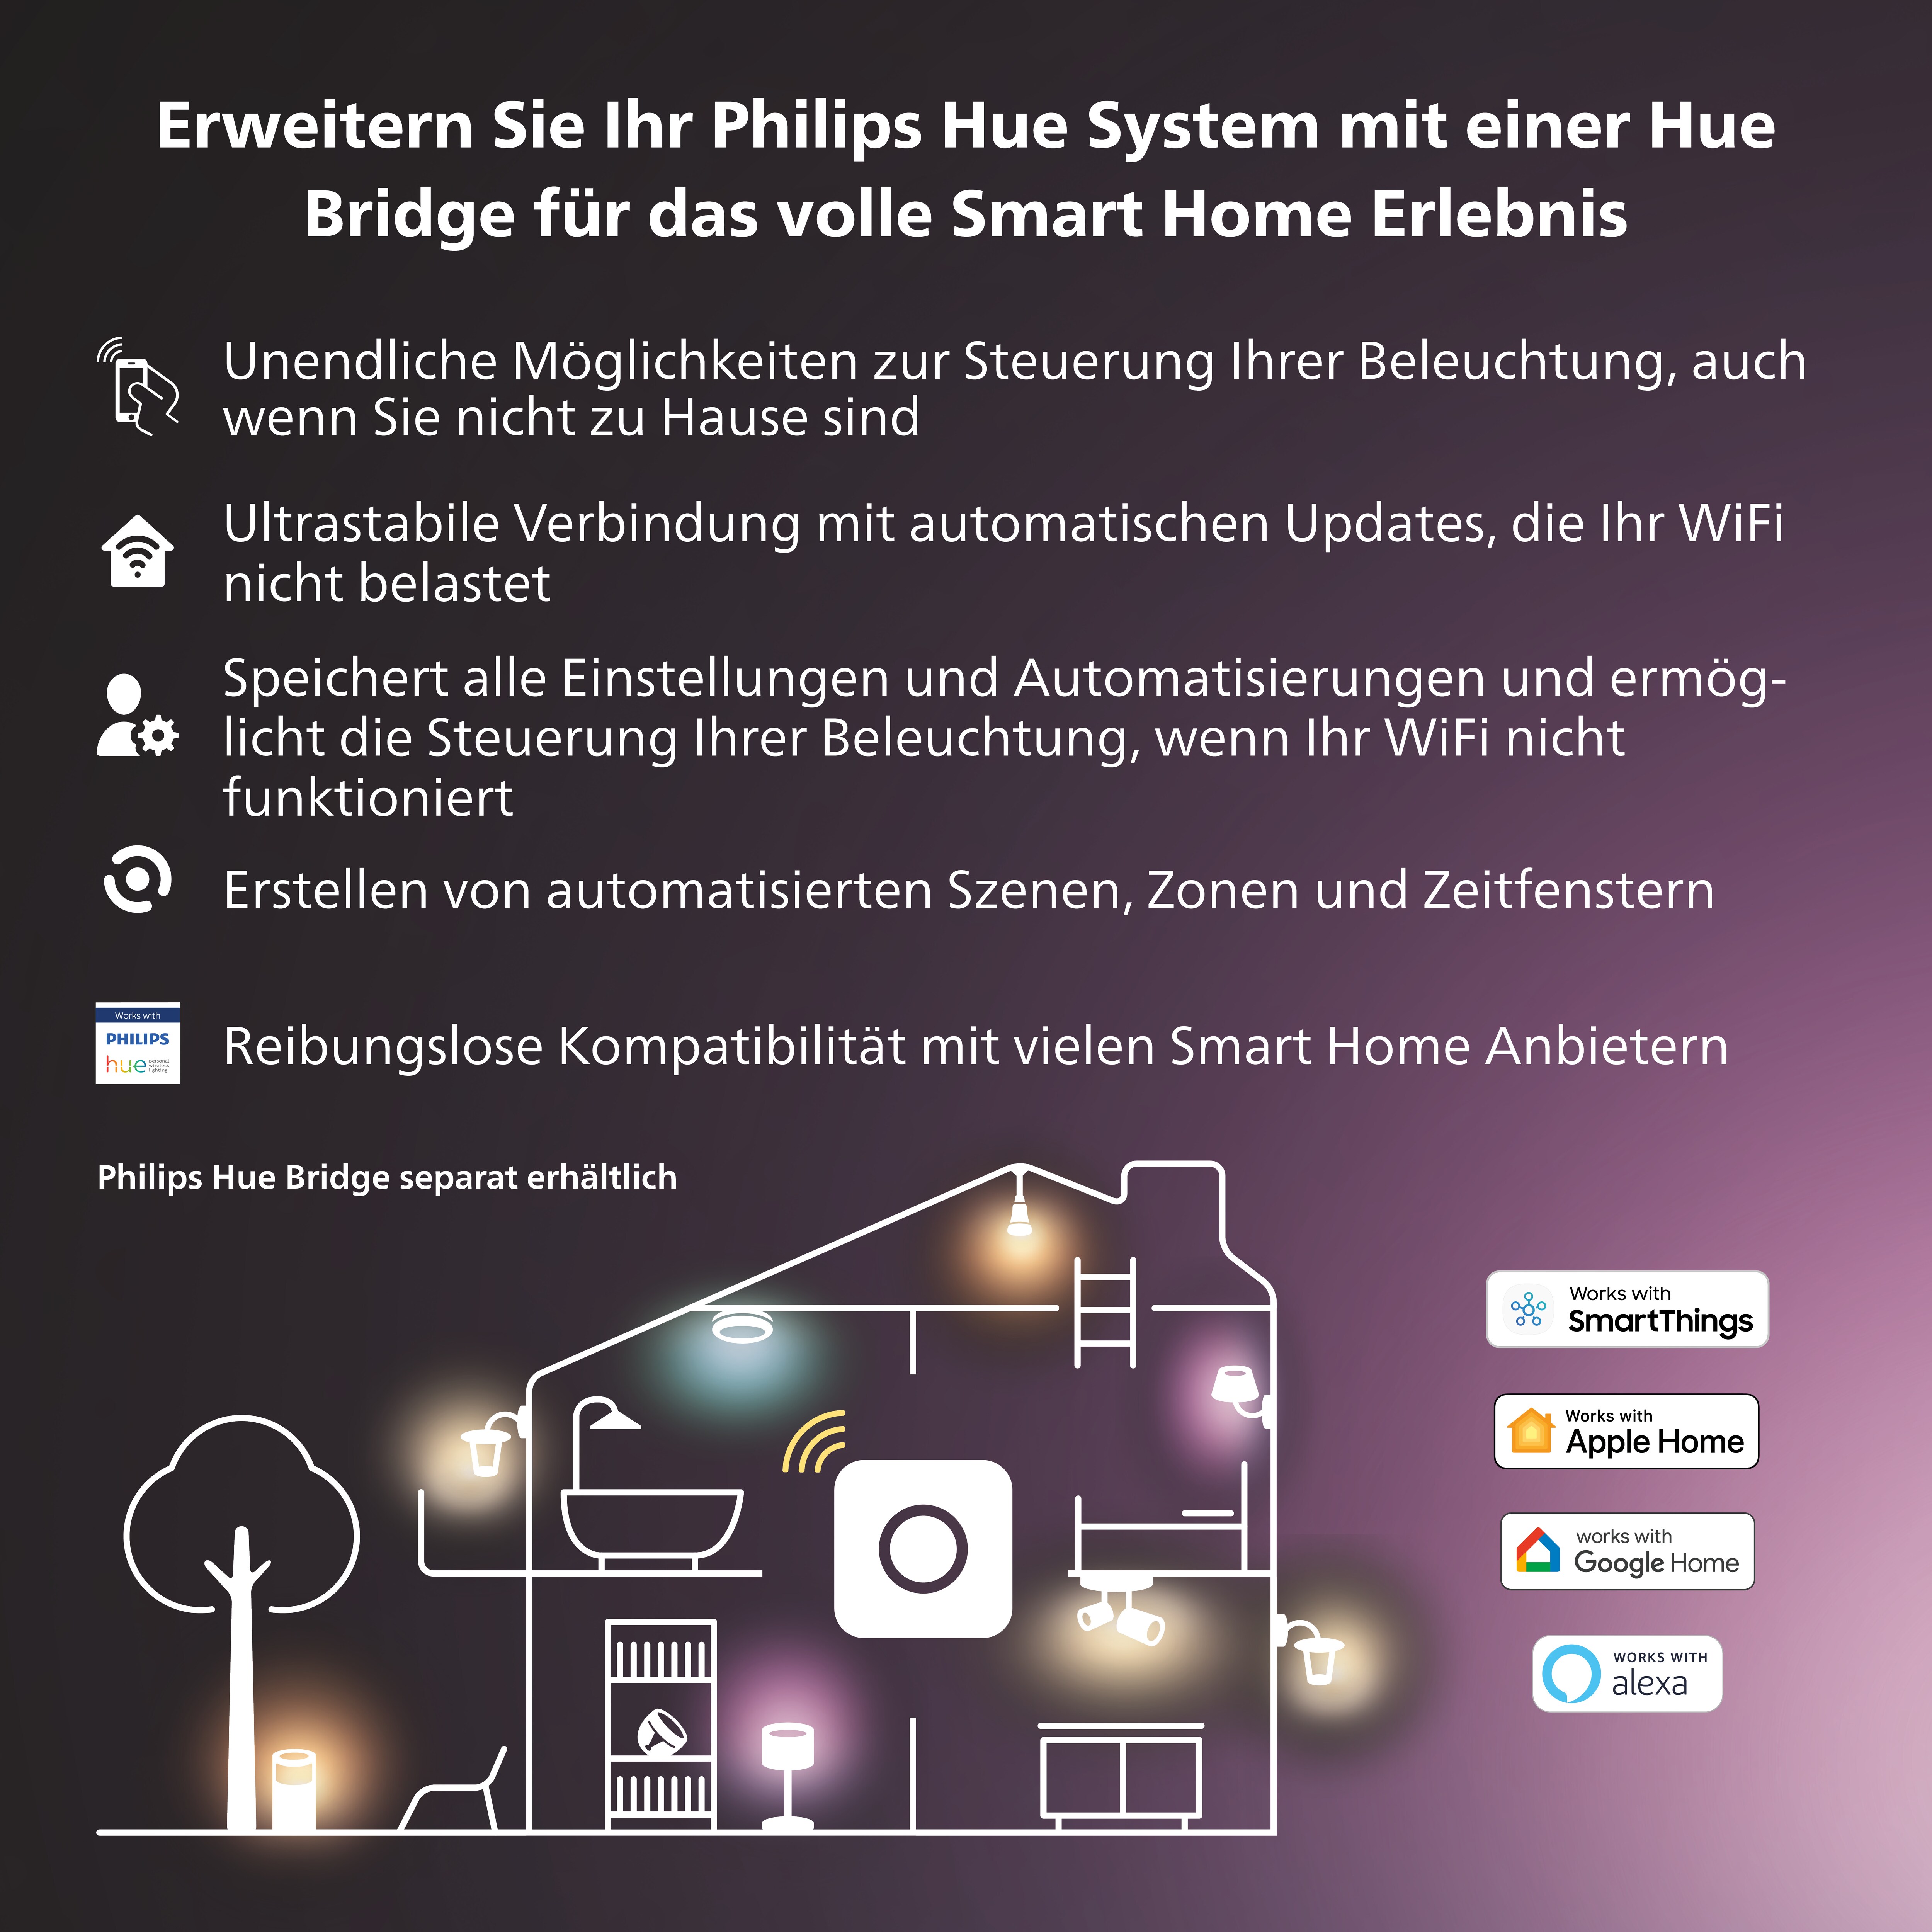 Philips Hue White & Color Ambiance Perifo Deckenleuchte sw • 3 Spots +  Lightbar ++ Cyberport